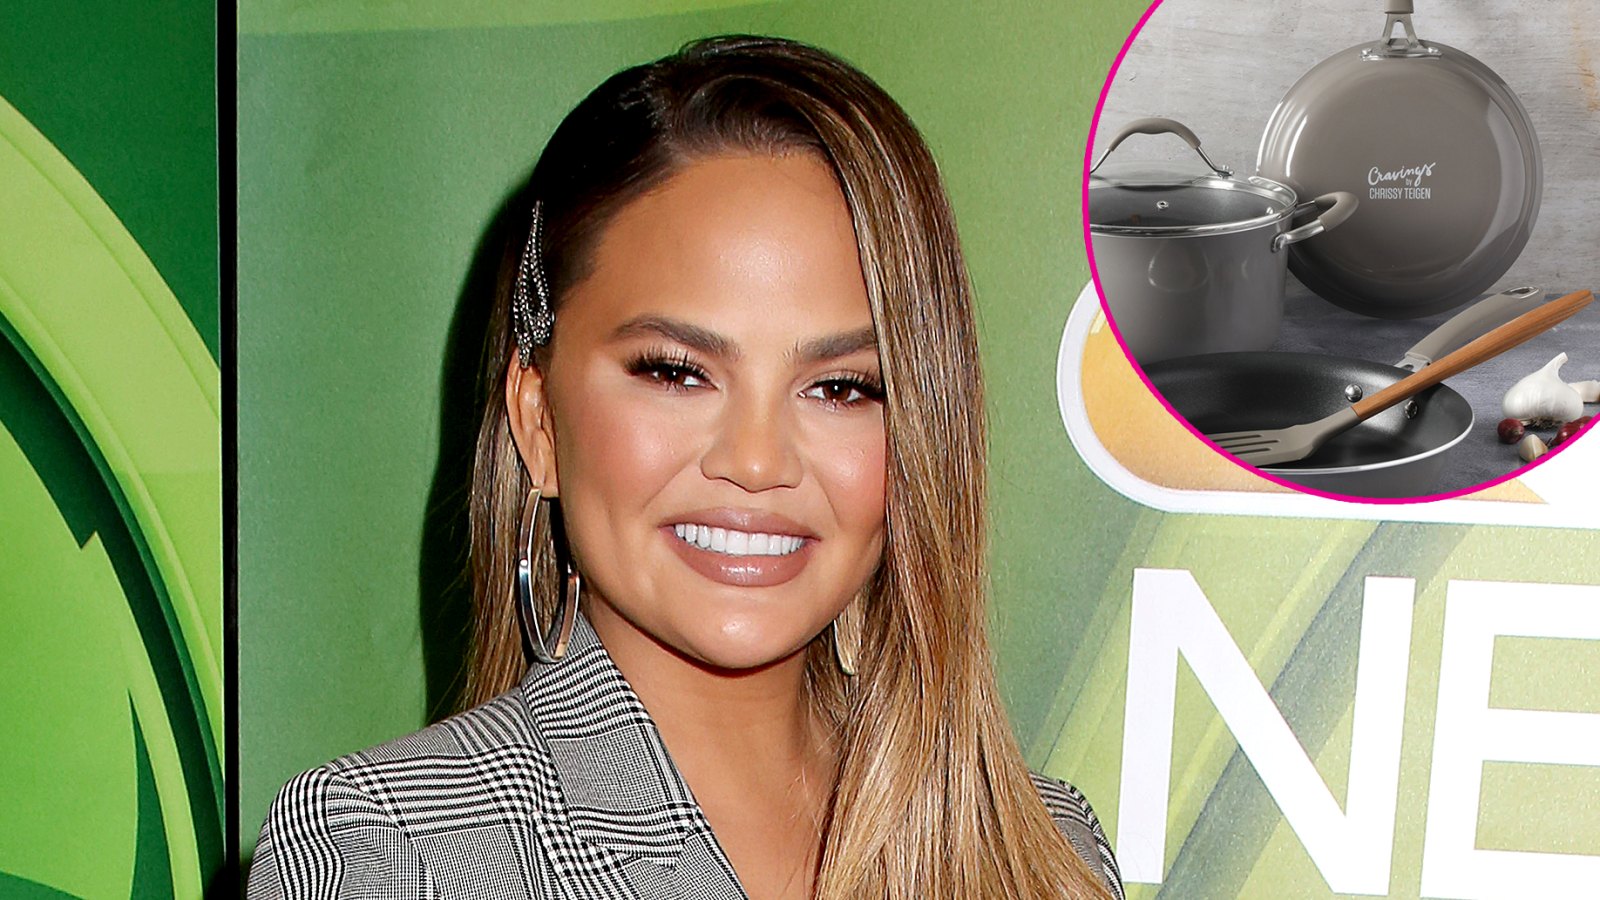 Chrissy-Teigen-Wants-to-Donate-Items-From-Her-Cookware-Line